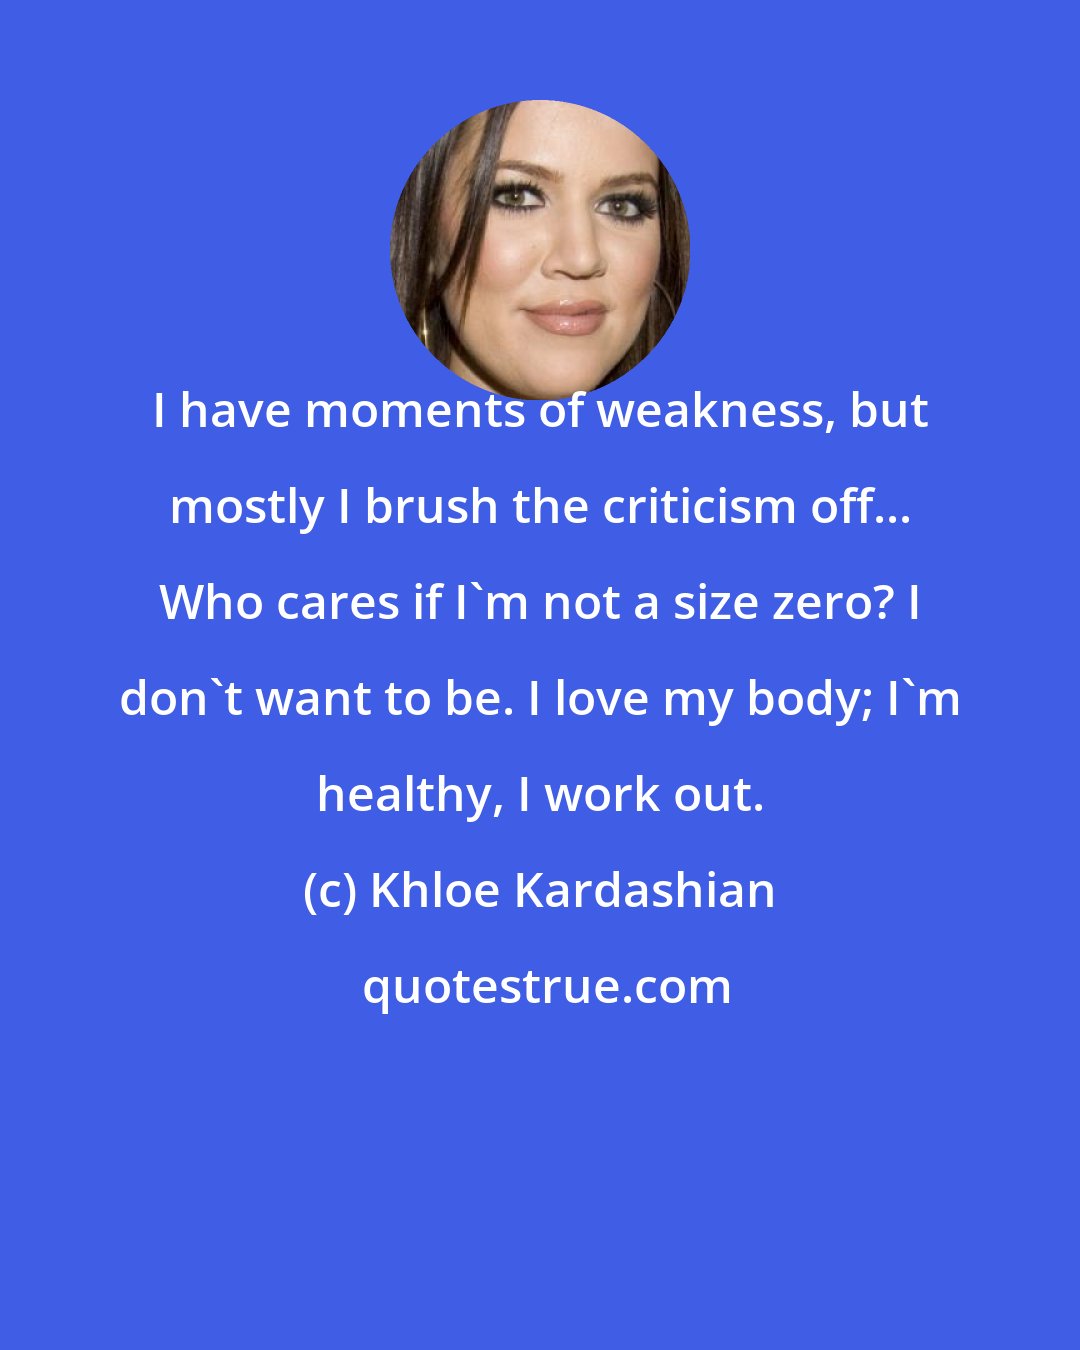 Khloe Kardashian: I have moments of weakness, but mostly I brush the criticism off... Who cares if I'm not a size zero? I don't want to be. I love my body; I'm healthy, I work out.